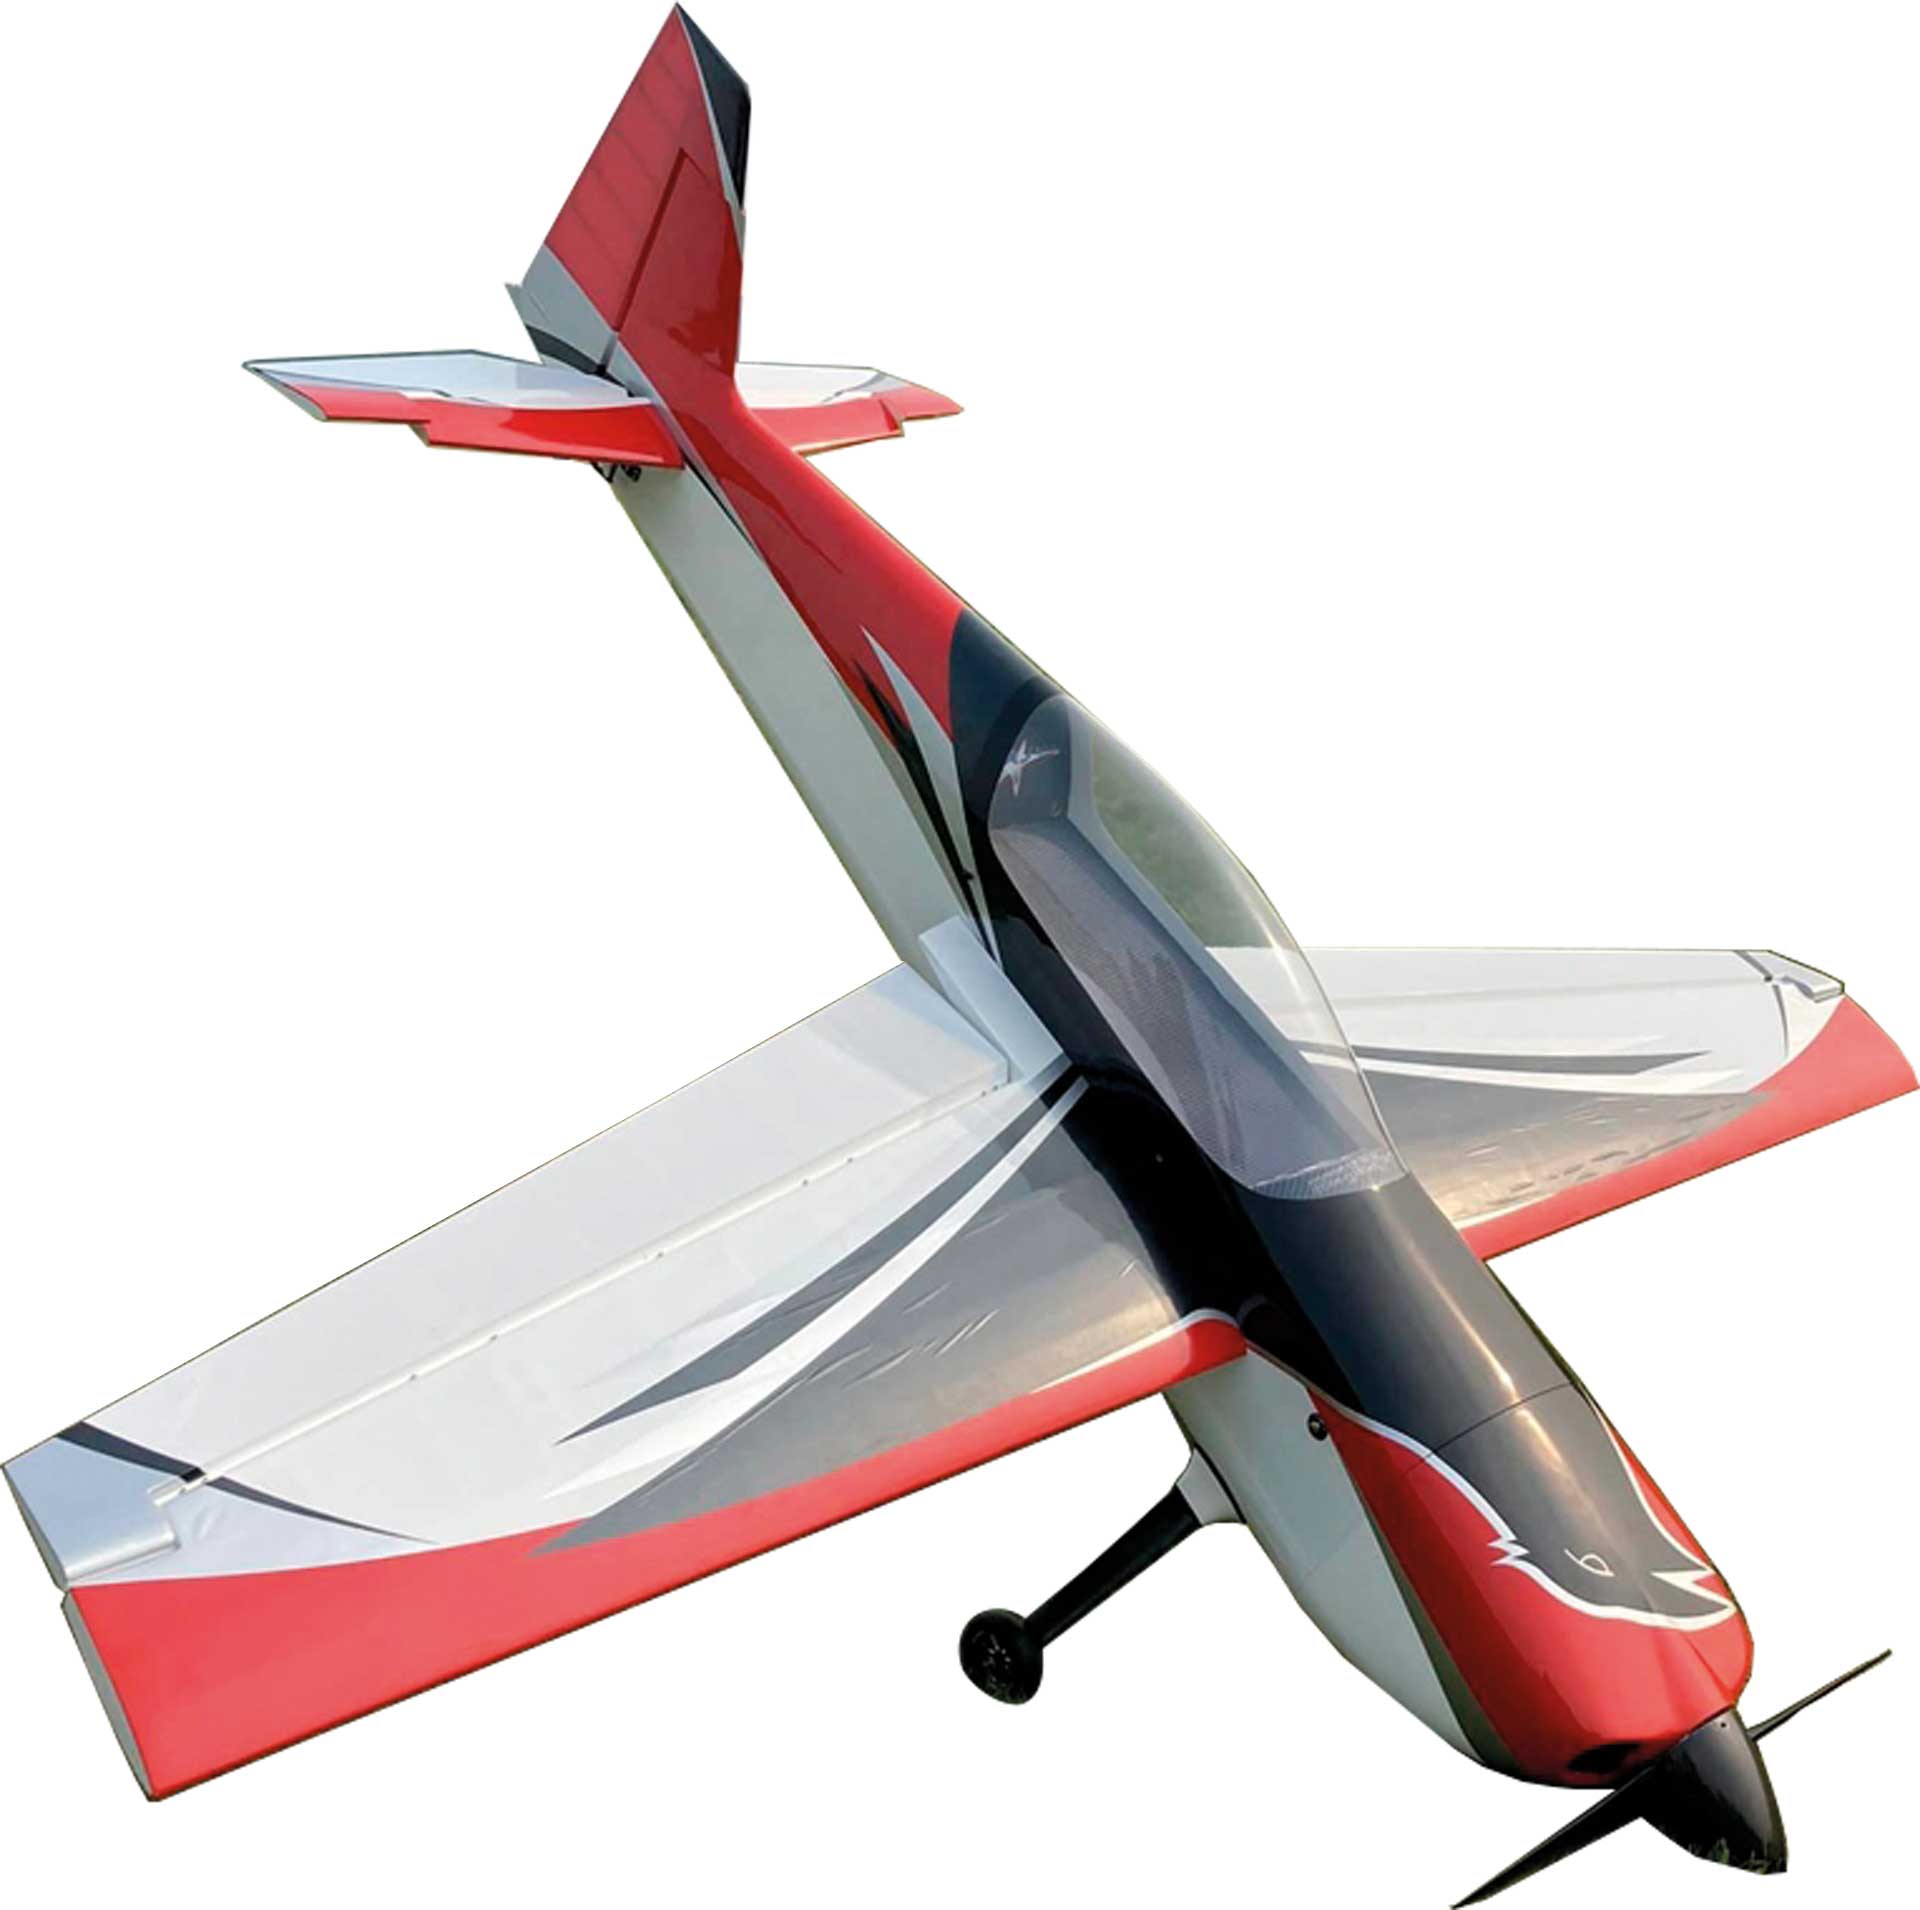 AJ AIRCRAFT Raven DT 106" ARF Rot/Schwarz Double Tapered Wing, Kunstflugmodell